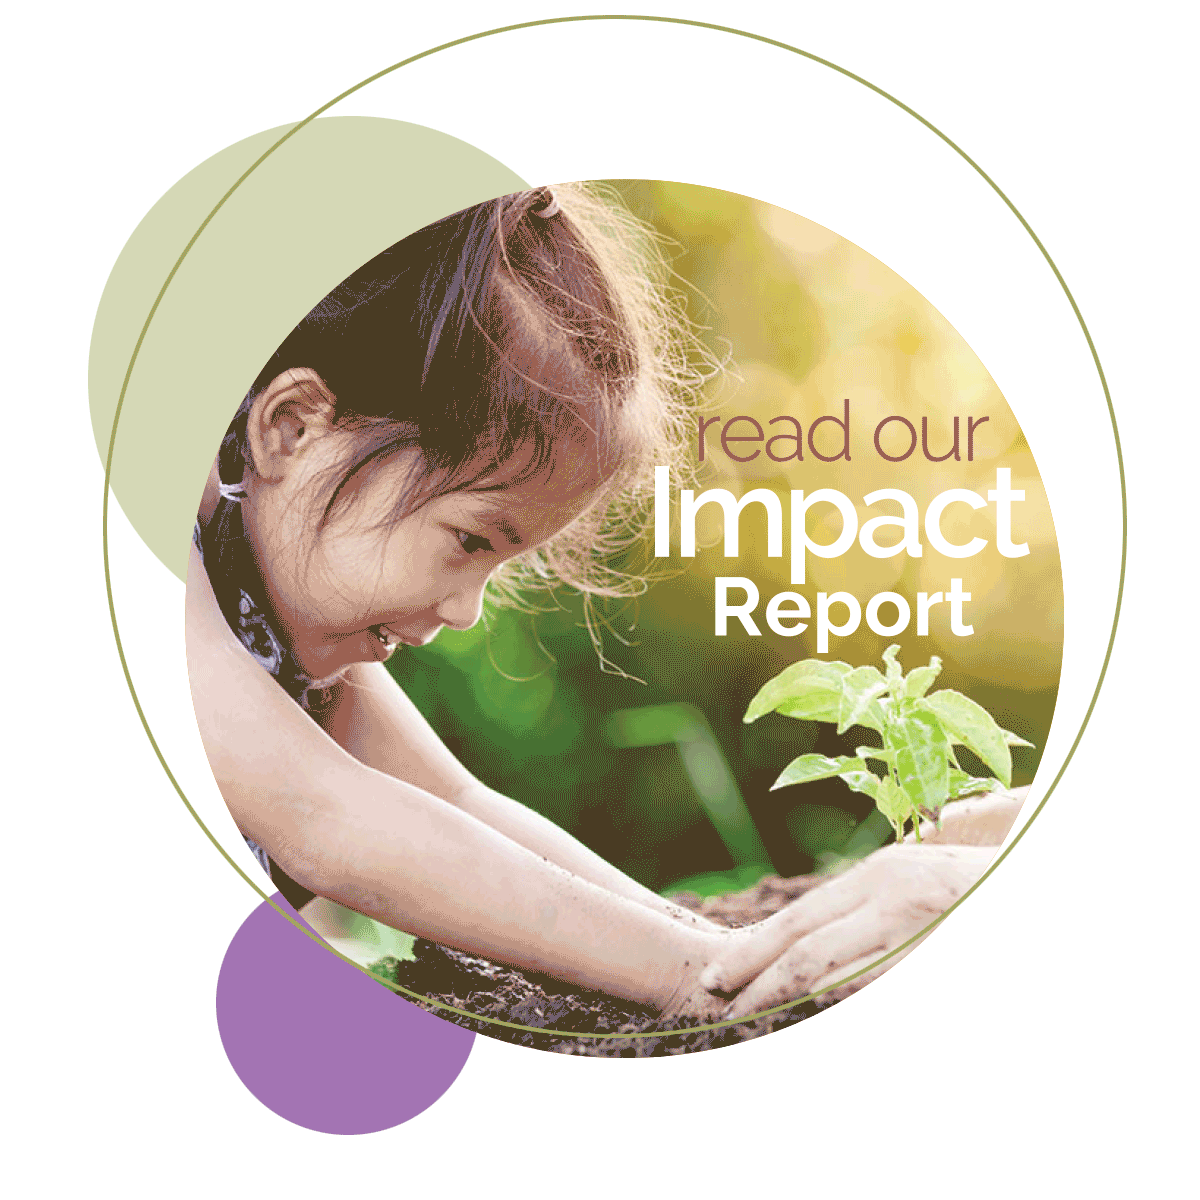 read our impact report